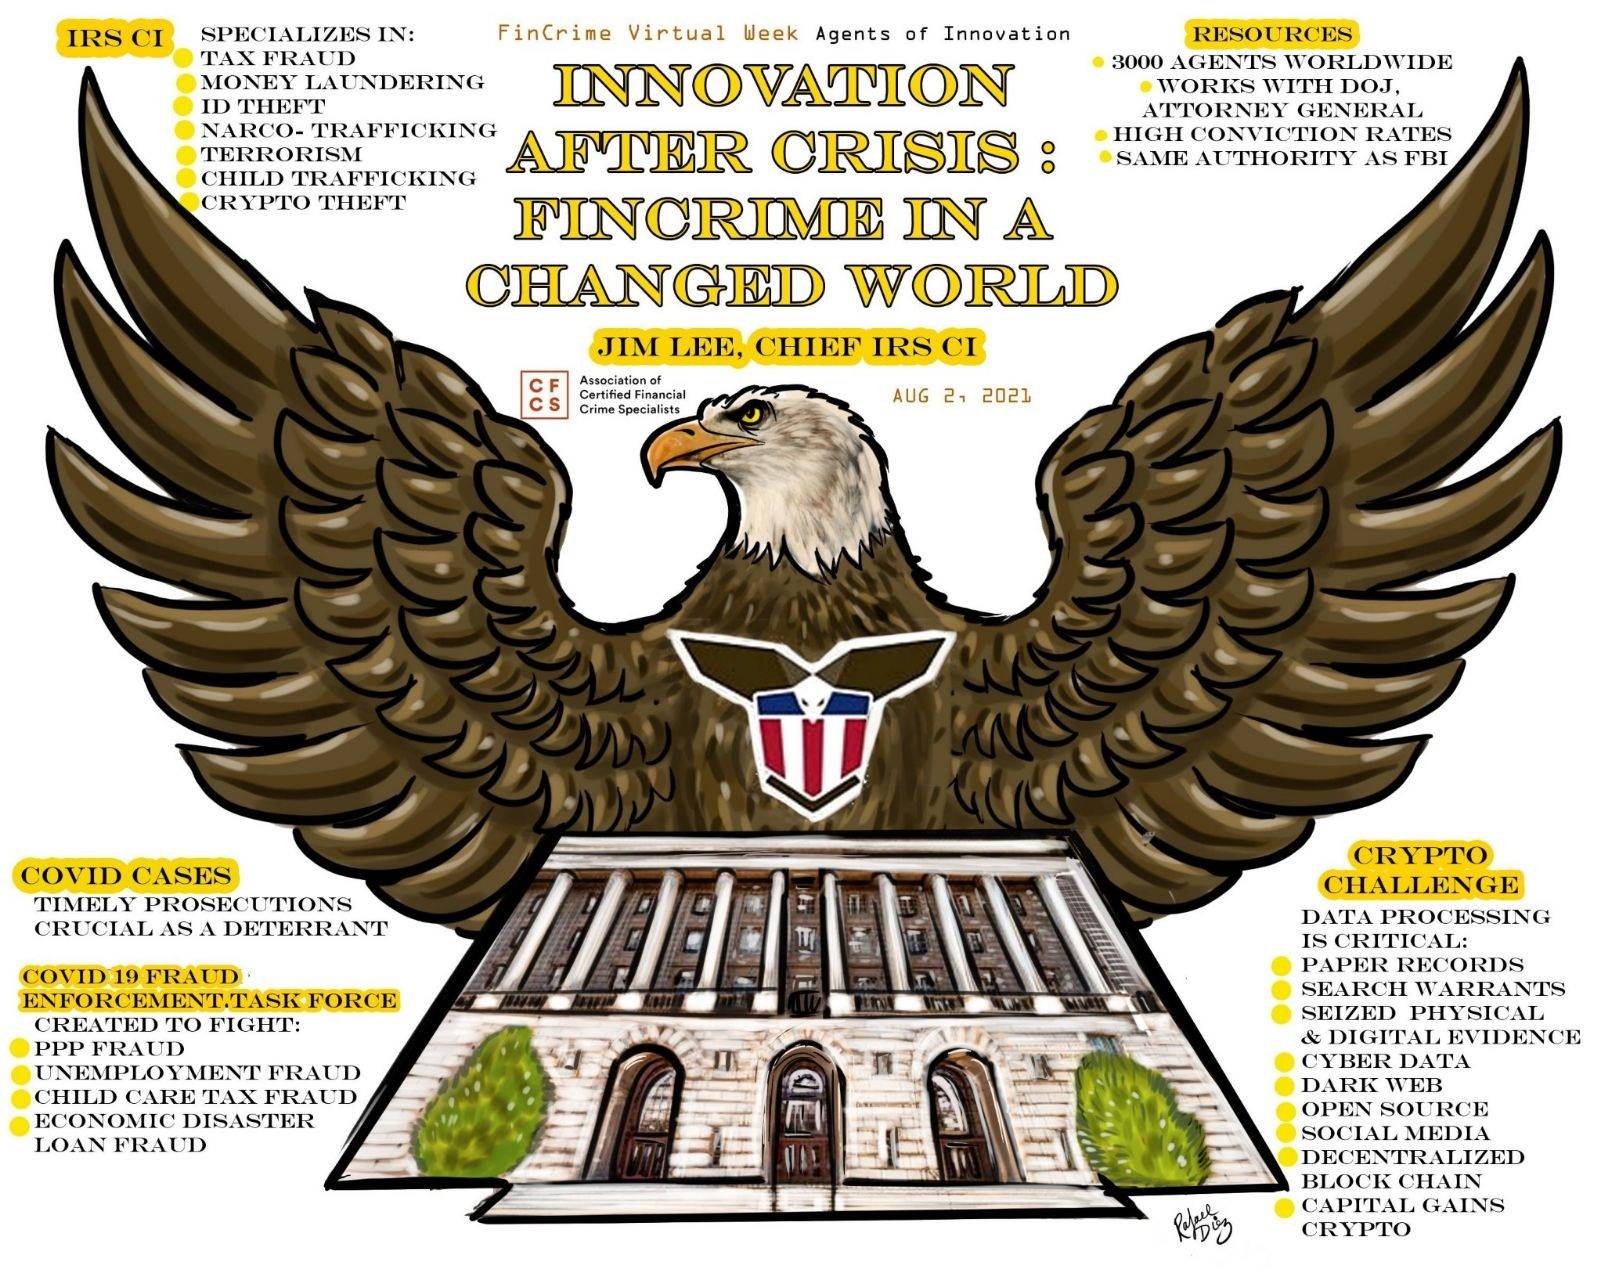 Innovation after crisis: fincrime in a changed world banner